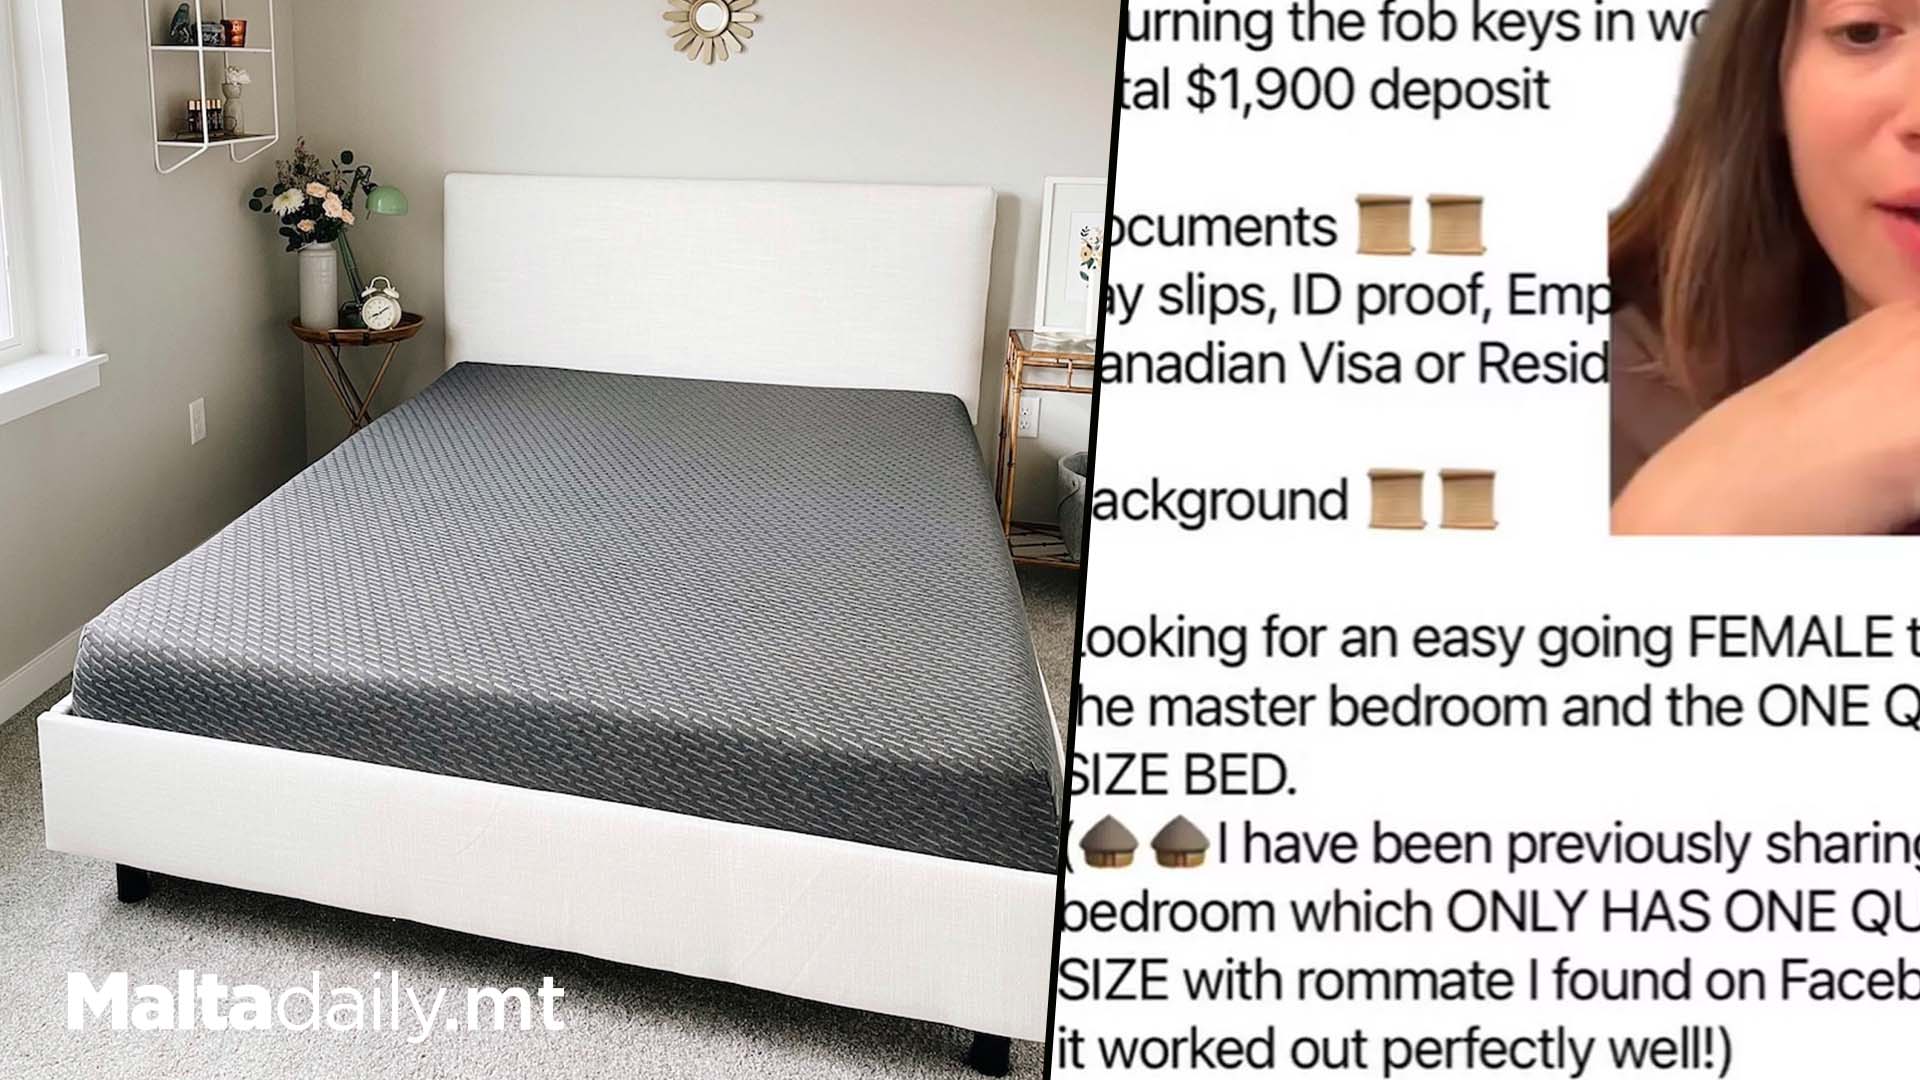 People In Toronto List Other Half Of Bed Due To High Rent Prices